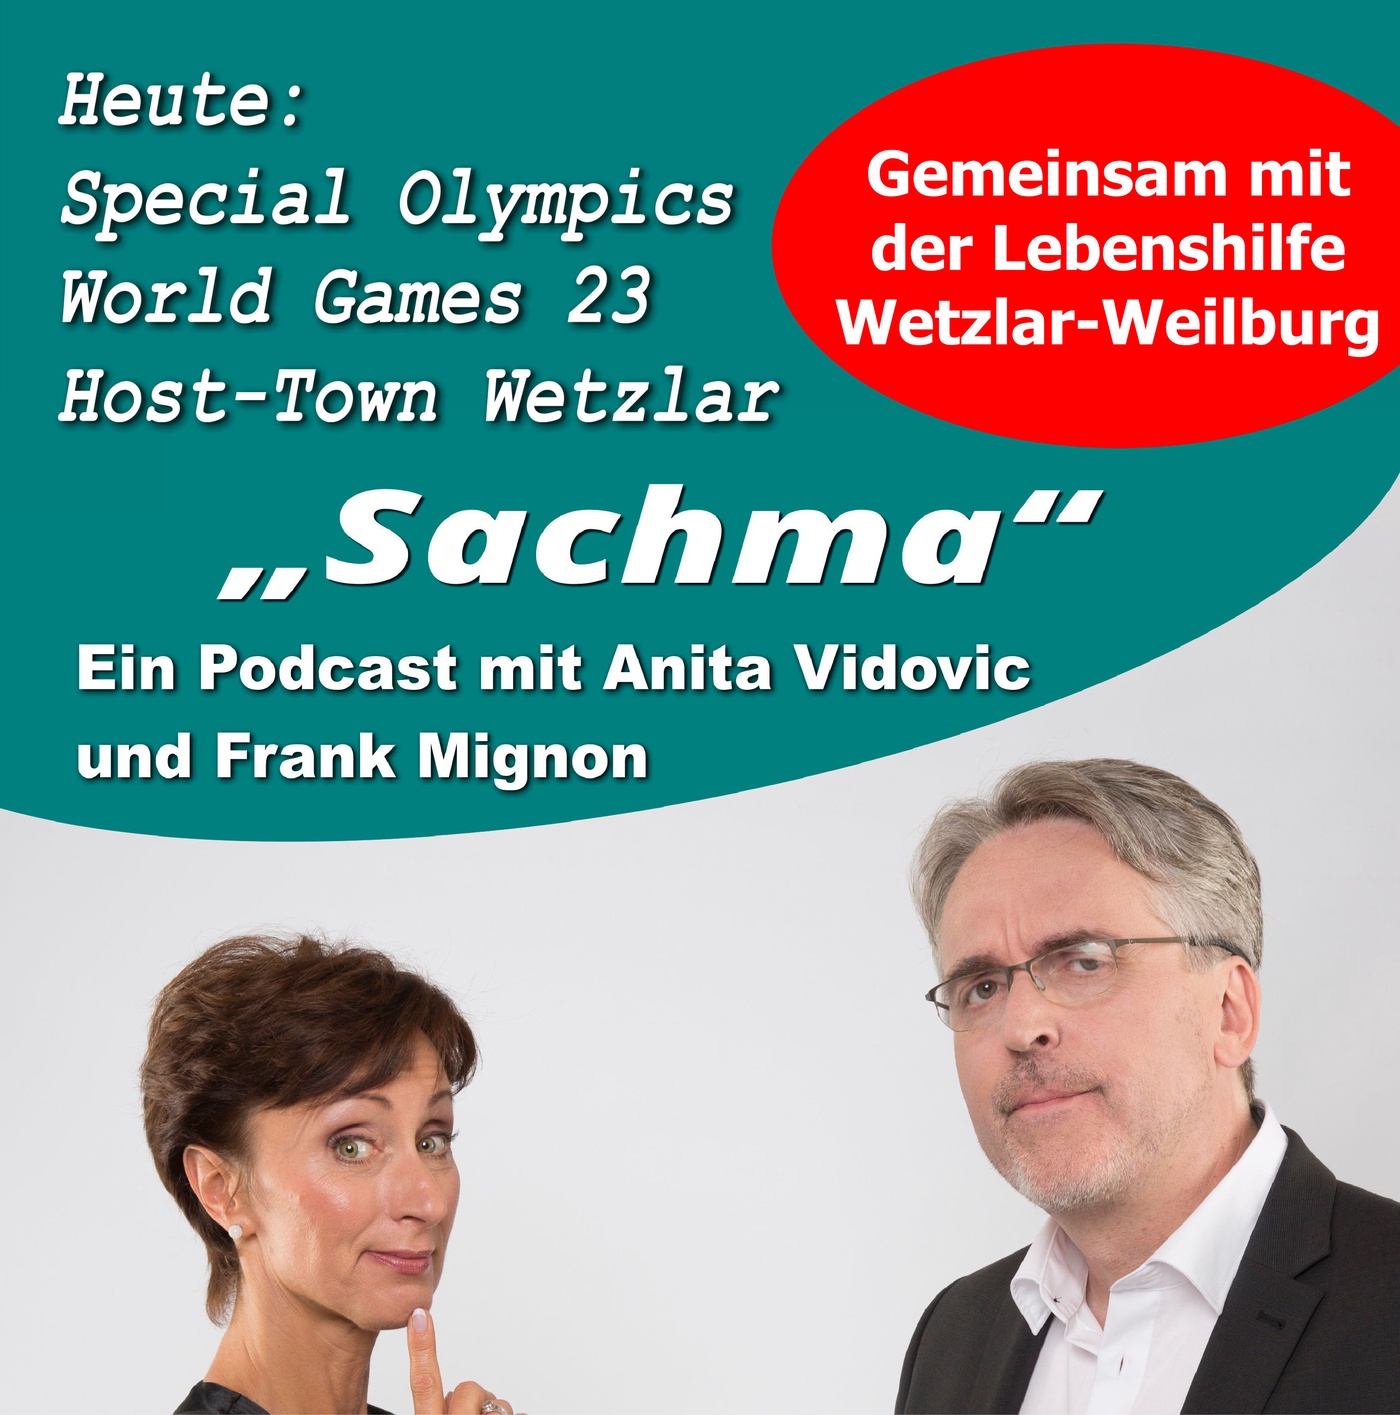 Sachma - Der Podcast - Special Olympics World Games 23